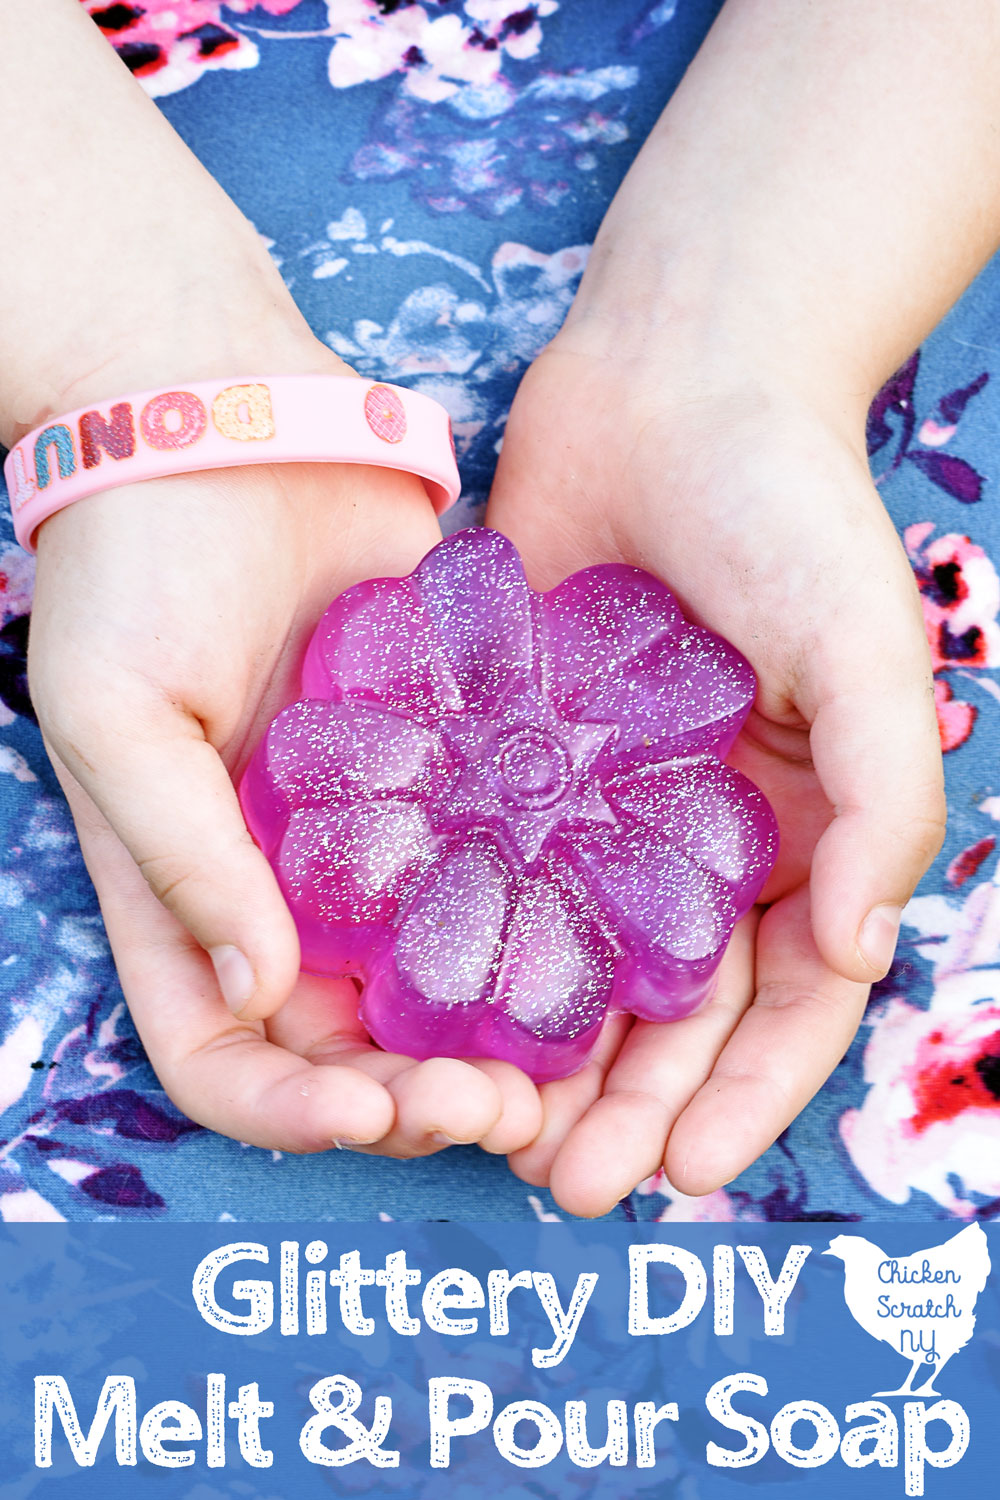 little girls hands holding a purple flower shaped bar of soap with holographic glitter